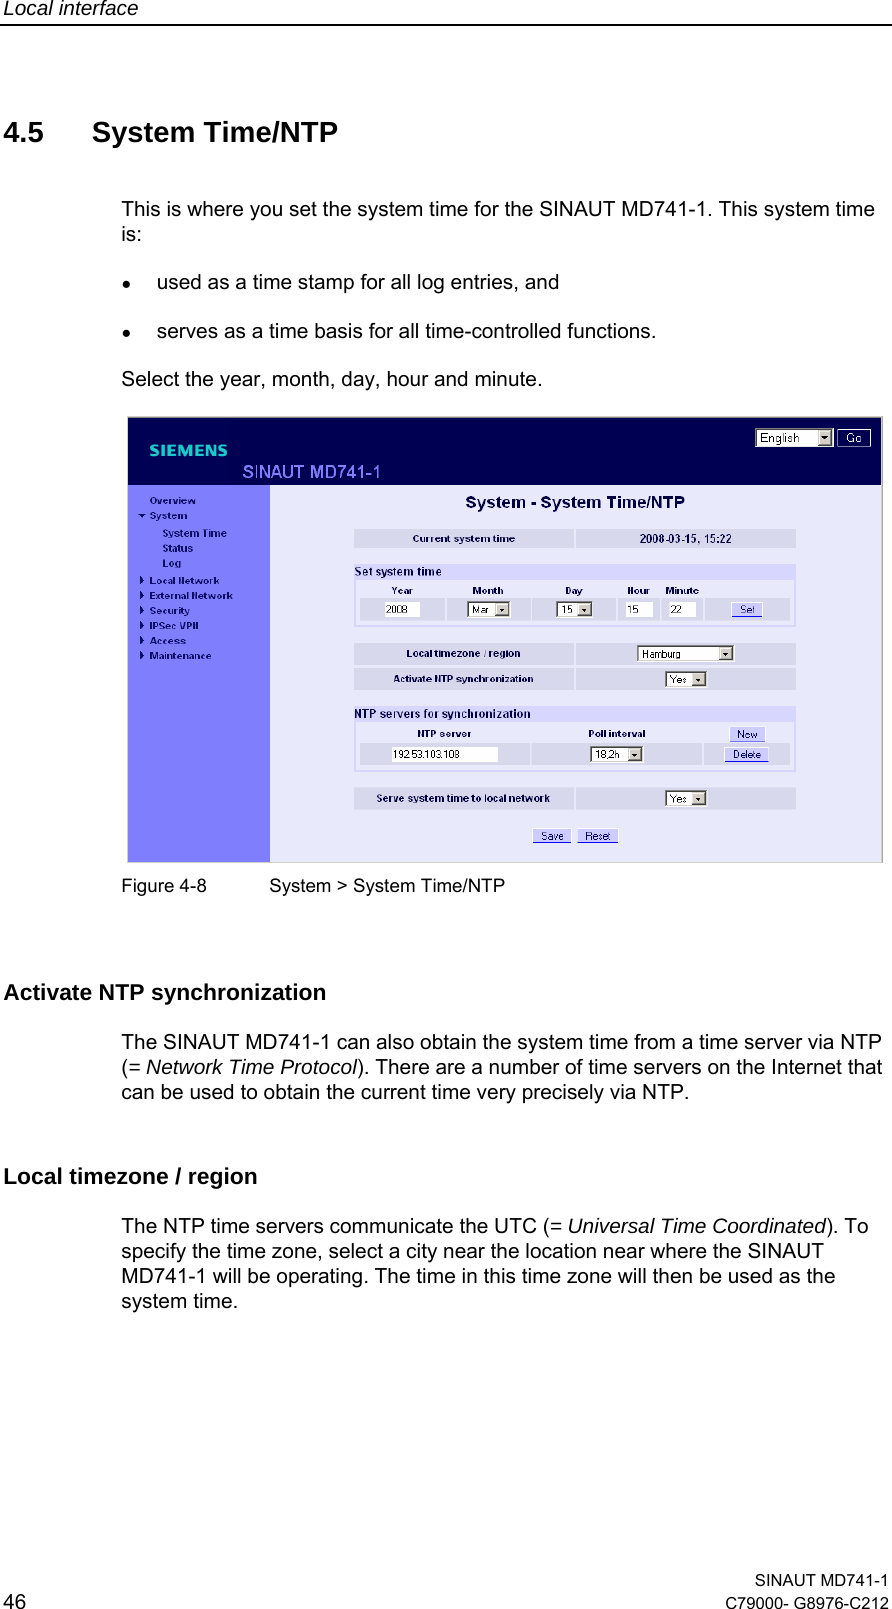 Local interface  SINAUT MD741-1 46  C79000- G8976-C212   4.5 System Time/NTP This is where you set the system time for the SINAUT MD741-1. This system time is: ● used as a time stamp for all log entries, and ● serves as a time basis for all time-controlled functions. Select the year, month, day, hour and minute.    Figure 4-8  System &gt; System Time/NTP  Activate NTP synchronization  The SINAUT MD741-1 can also obtain the system time from a time server via NTP (= Network Time Protocol). There are a number of time servers on the Internet that can be used to obtain the current time very precisely via NTP.  Local timezone / region The NTP time servers communicate the UTC (= Universal Time Coordinated). To specify the time zone, select a city near the location near where the SINAUT MD741-1 will be operating. The time in this time zone will then be used as the system time. 